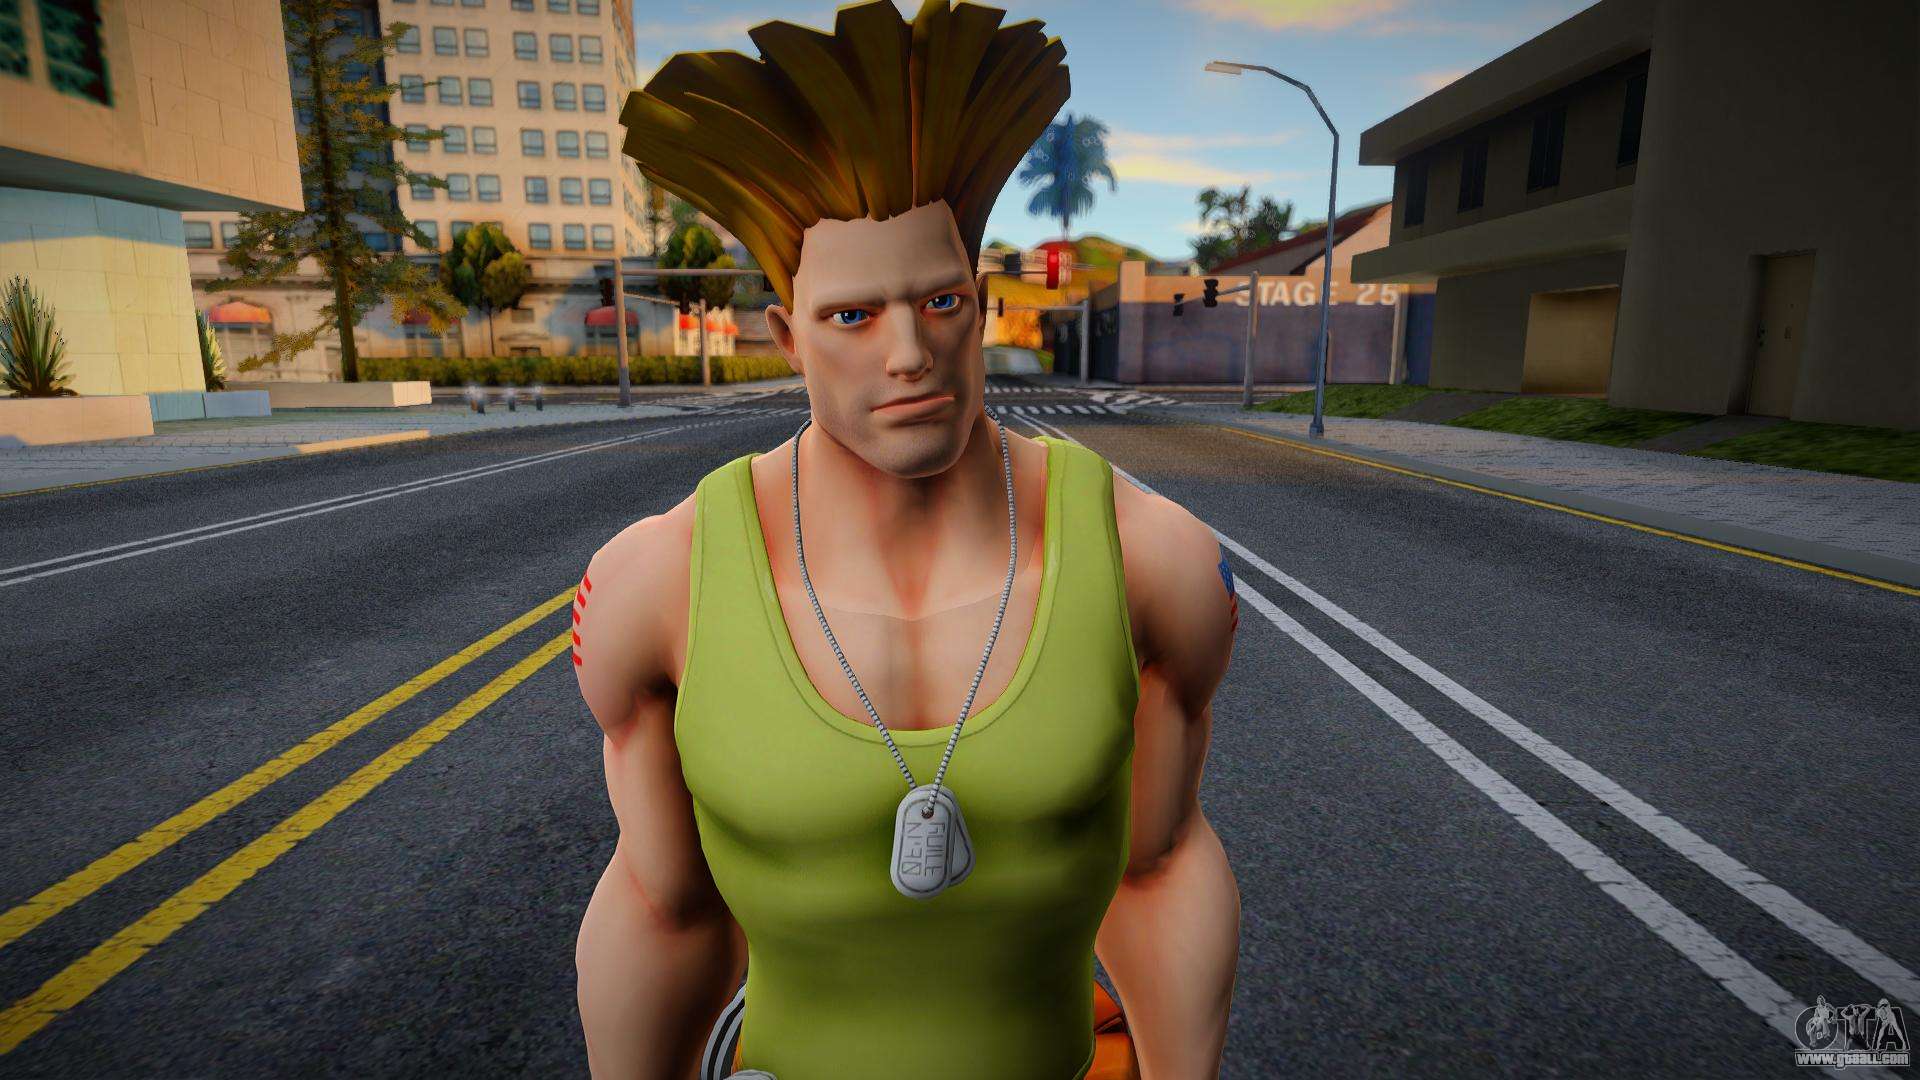 Download Guile from Street fighter 4 for GTA San Andreas